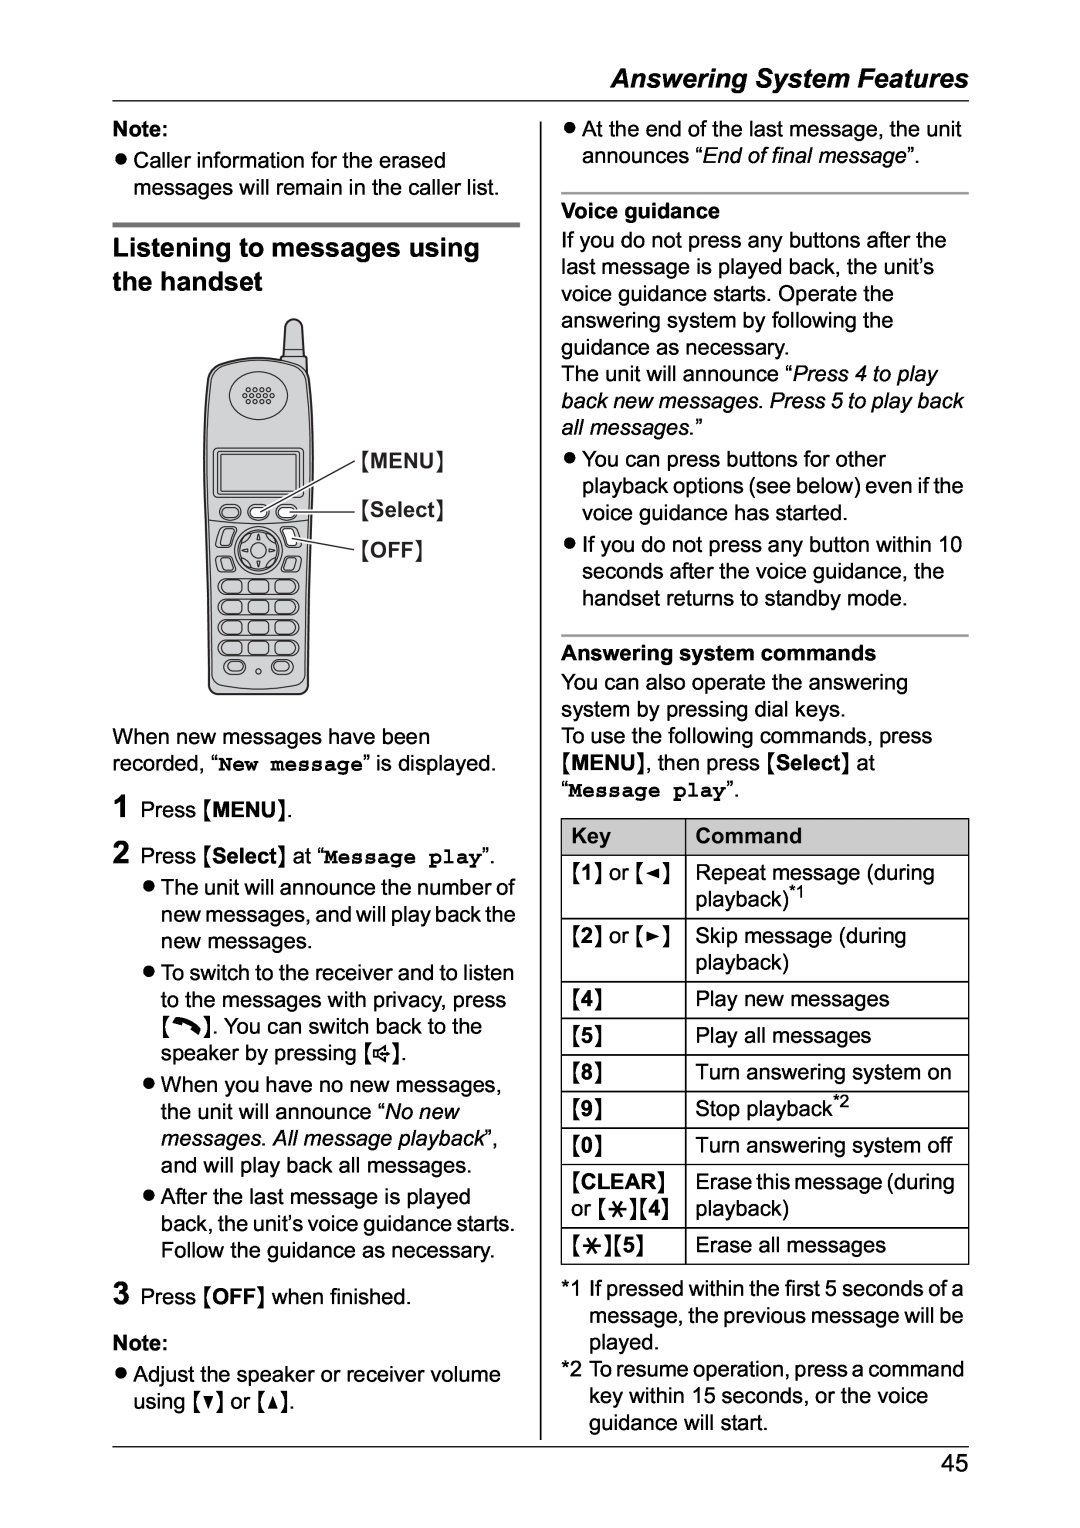 Panasonic KX-TG2432NZ Listening to messages using the handset, Menu, Select OFF, Voice guidance, Answering system commands 